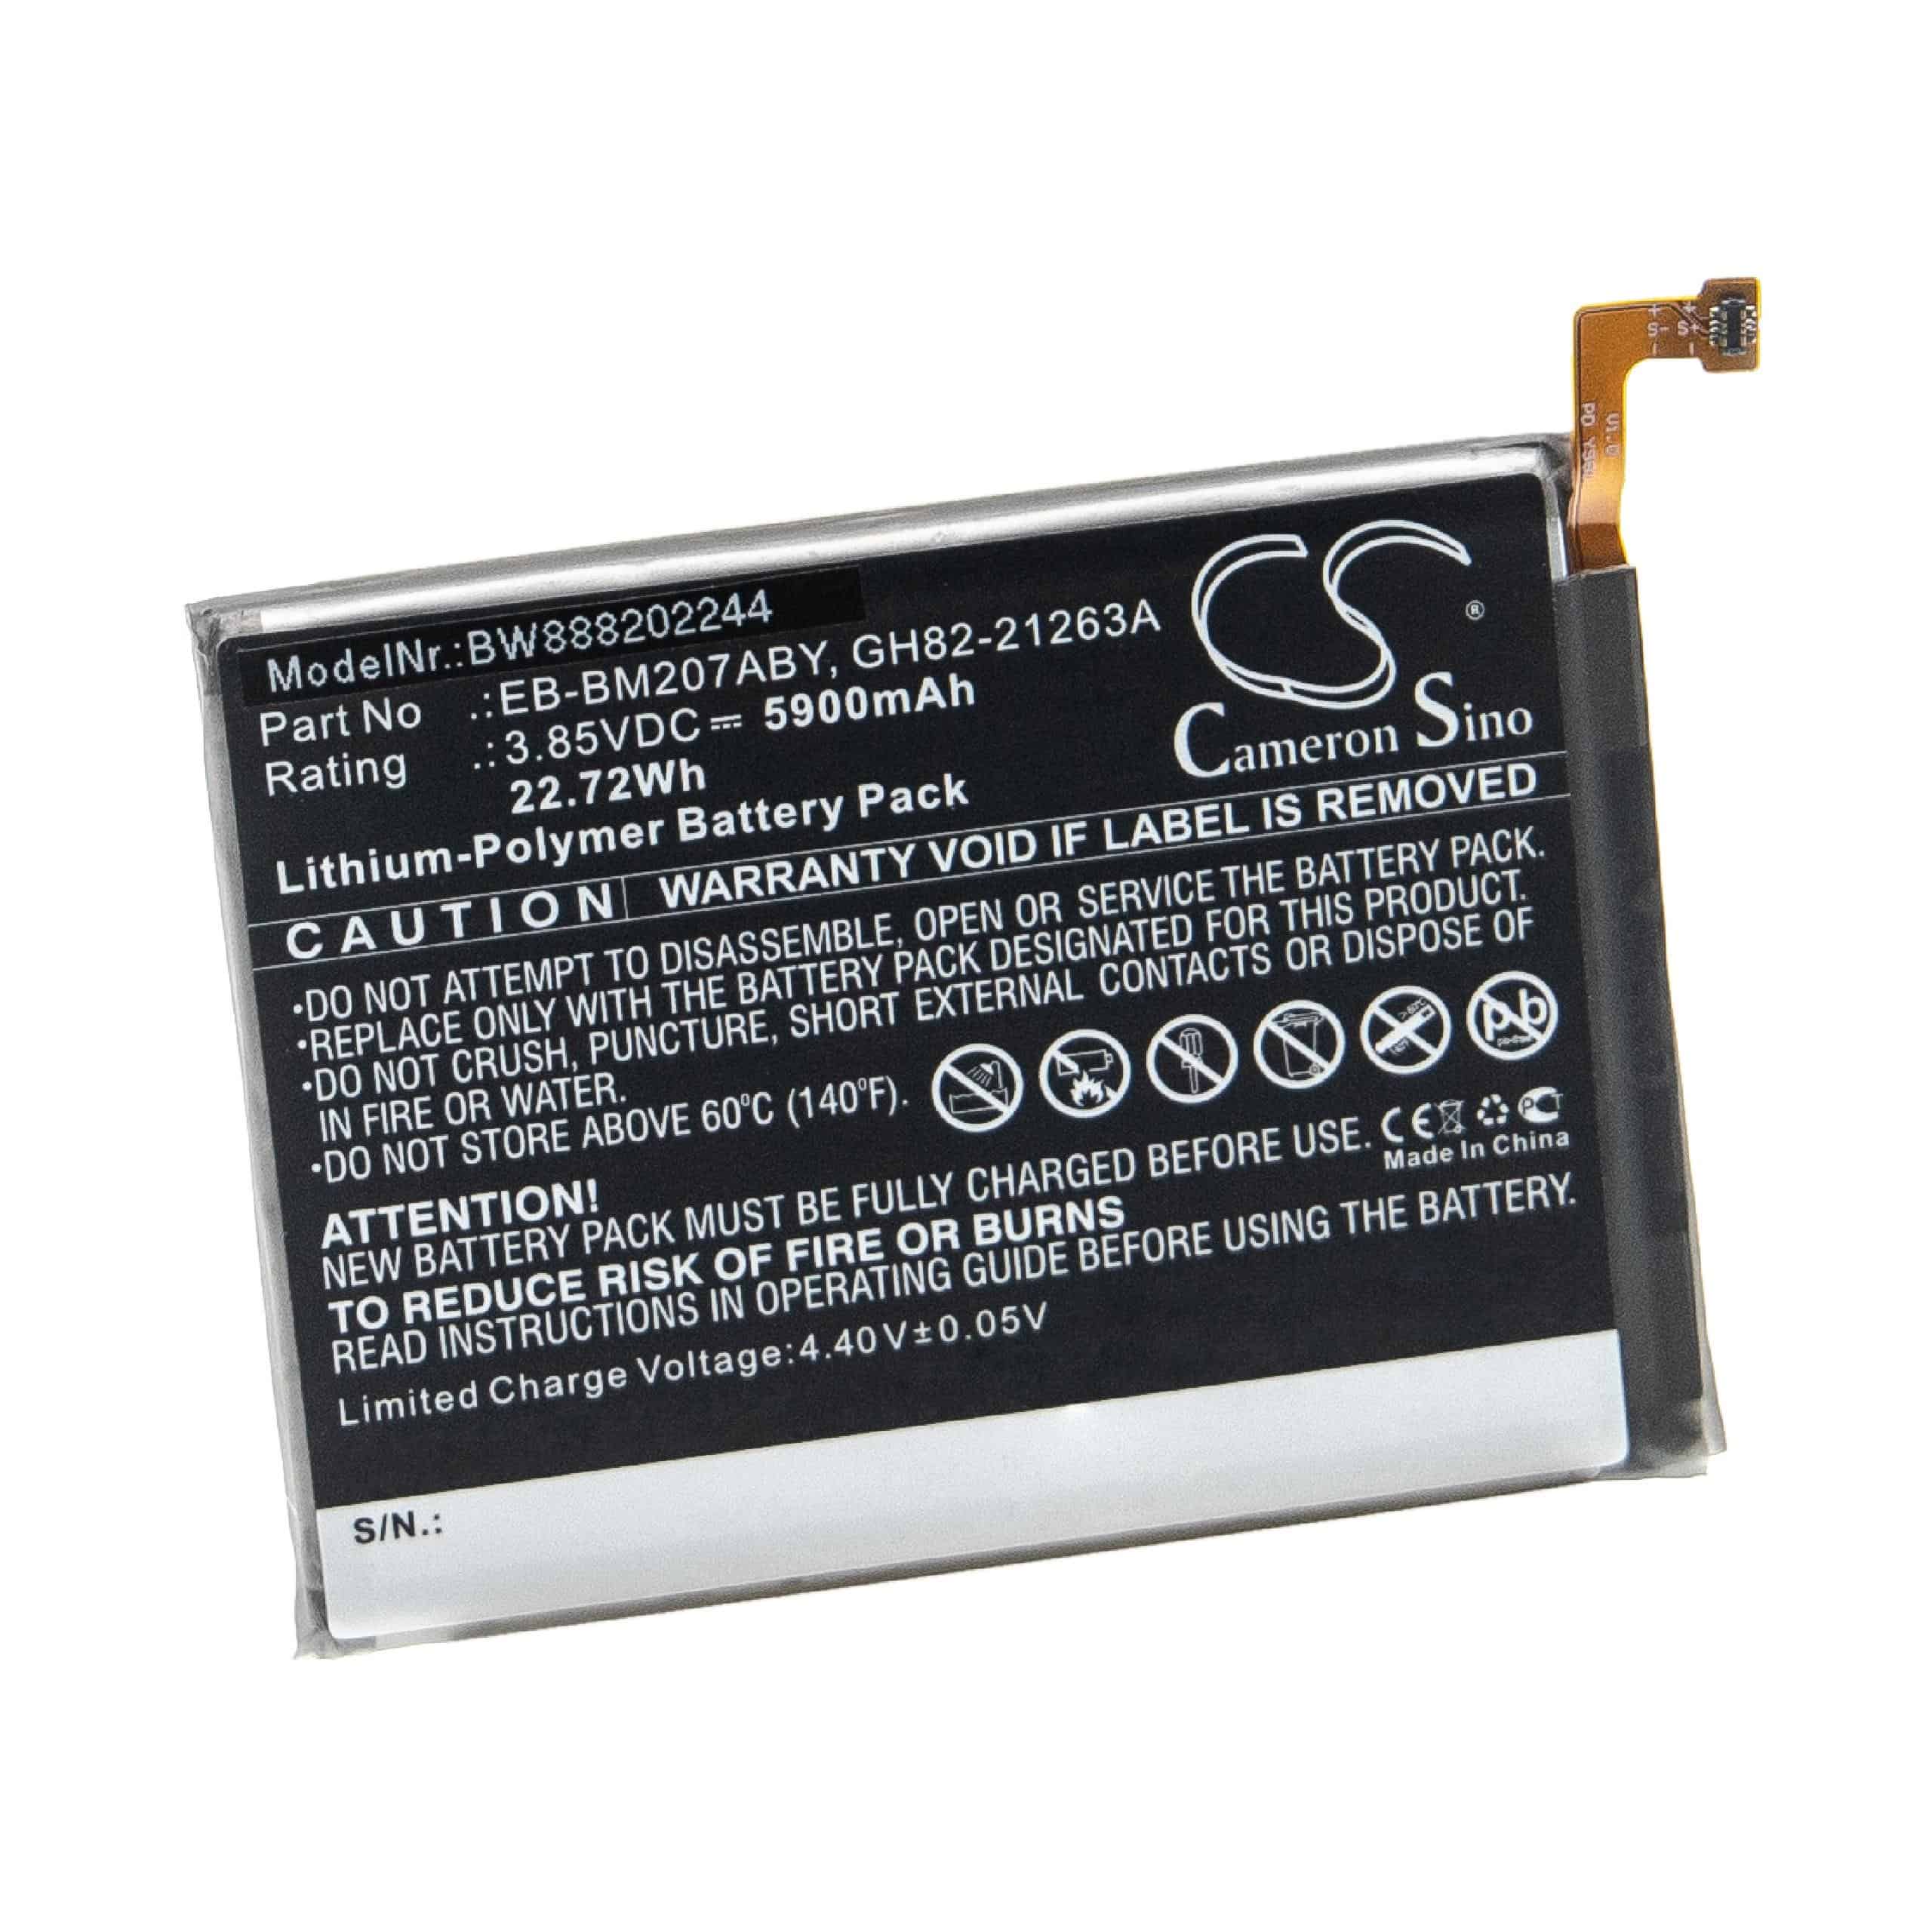 Mobile Phone Battery Replacement for Samsung GH82-21263A, EB-BM207ABY - 5900mAh 3.85V Li-polymer